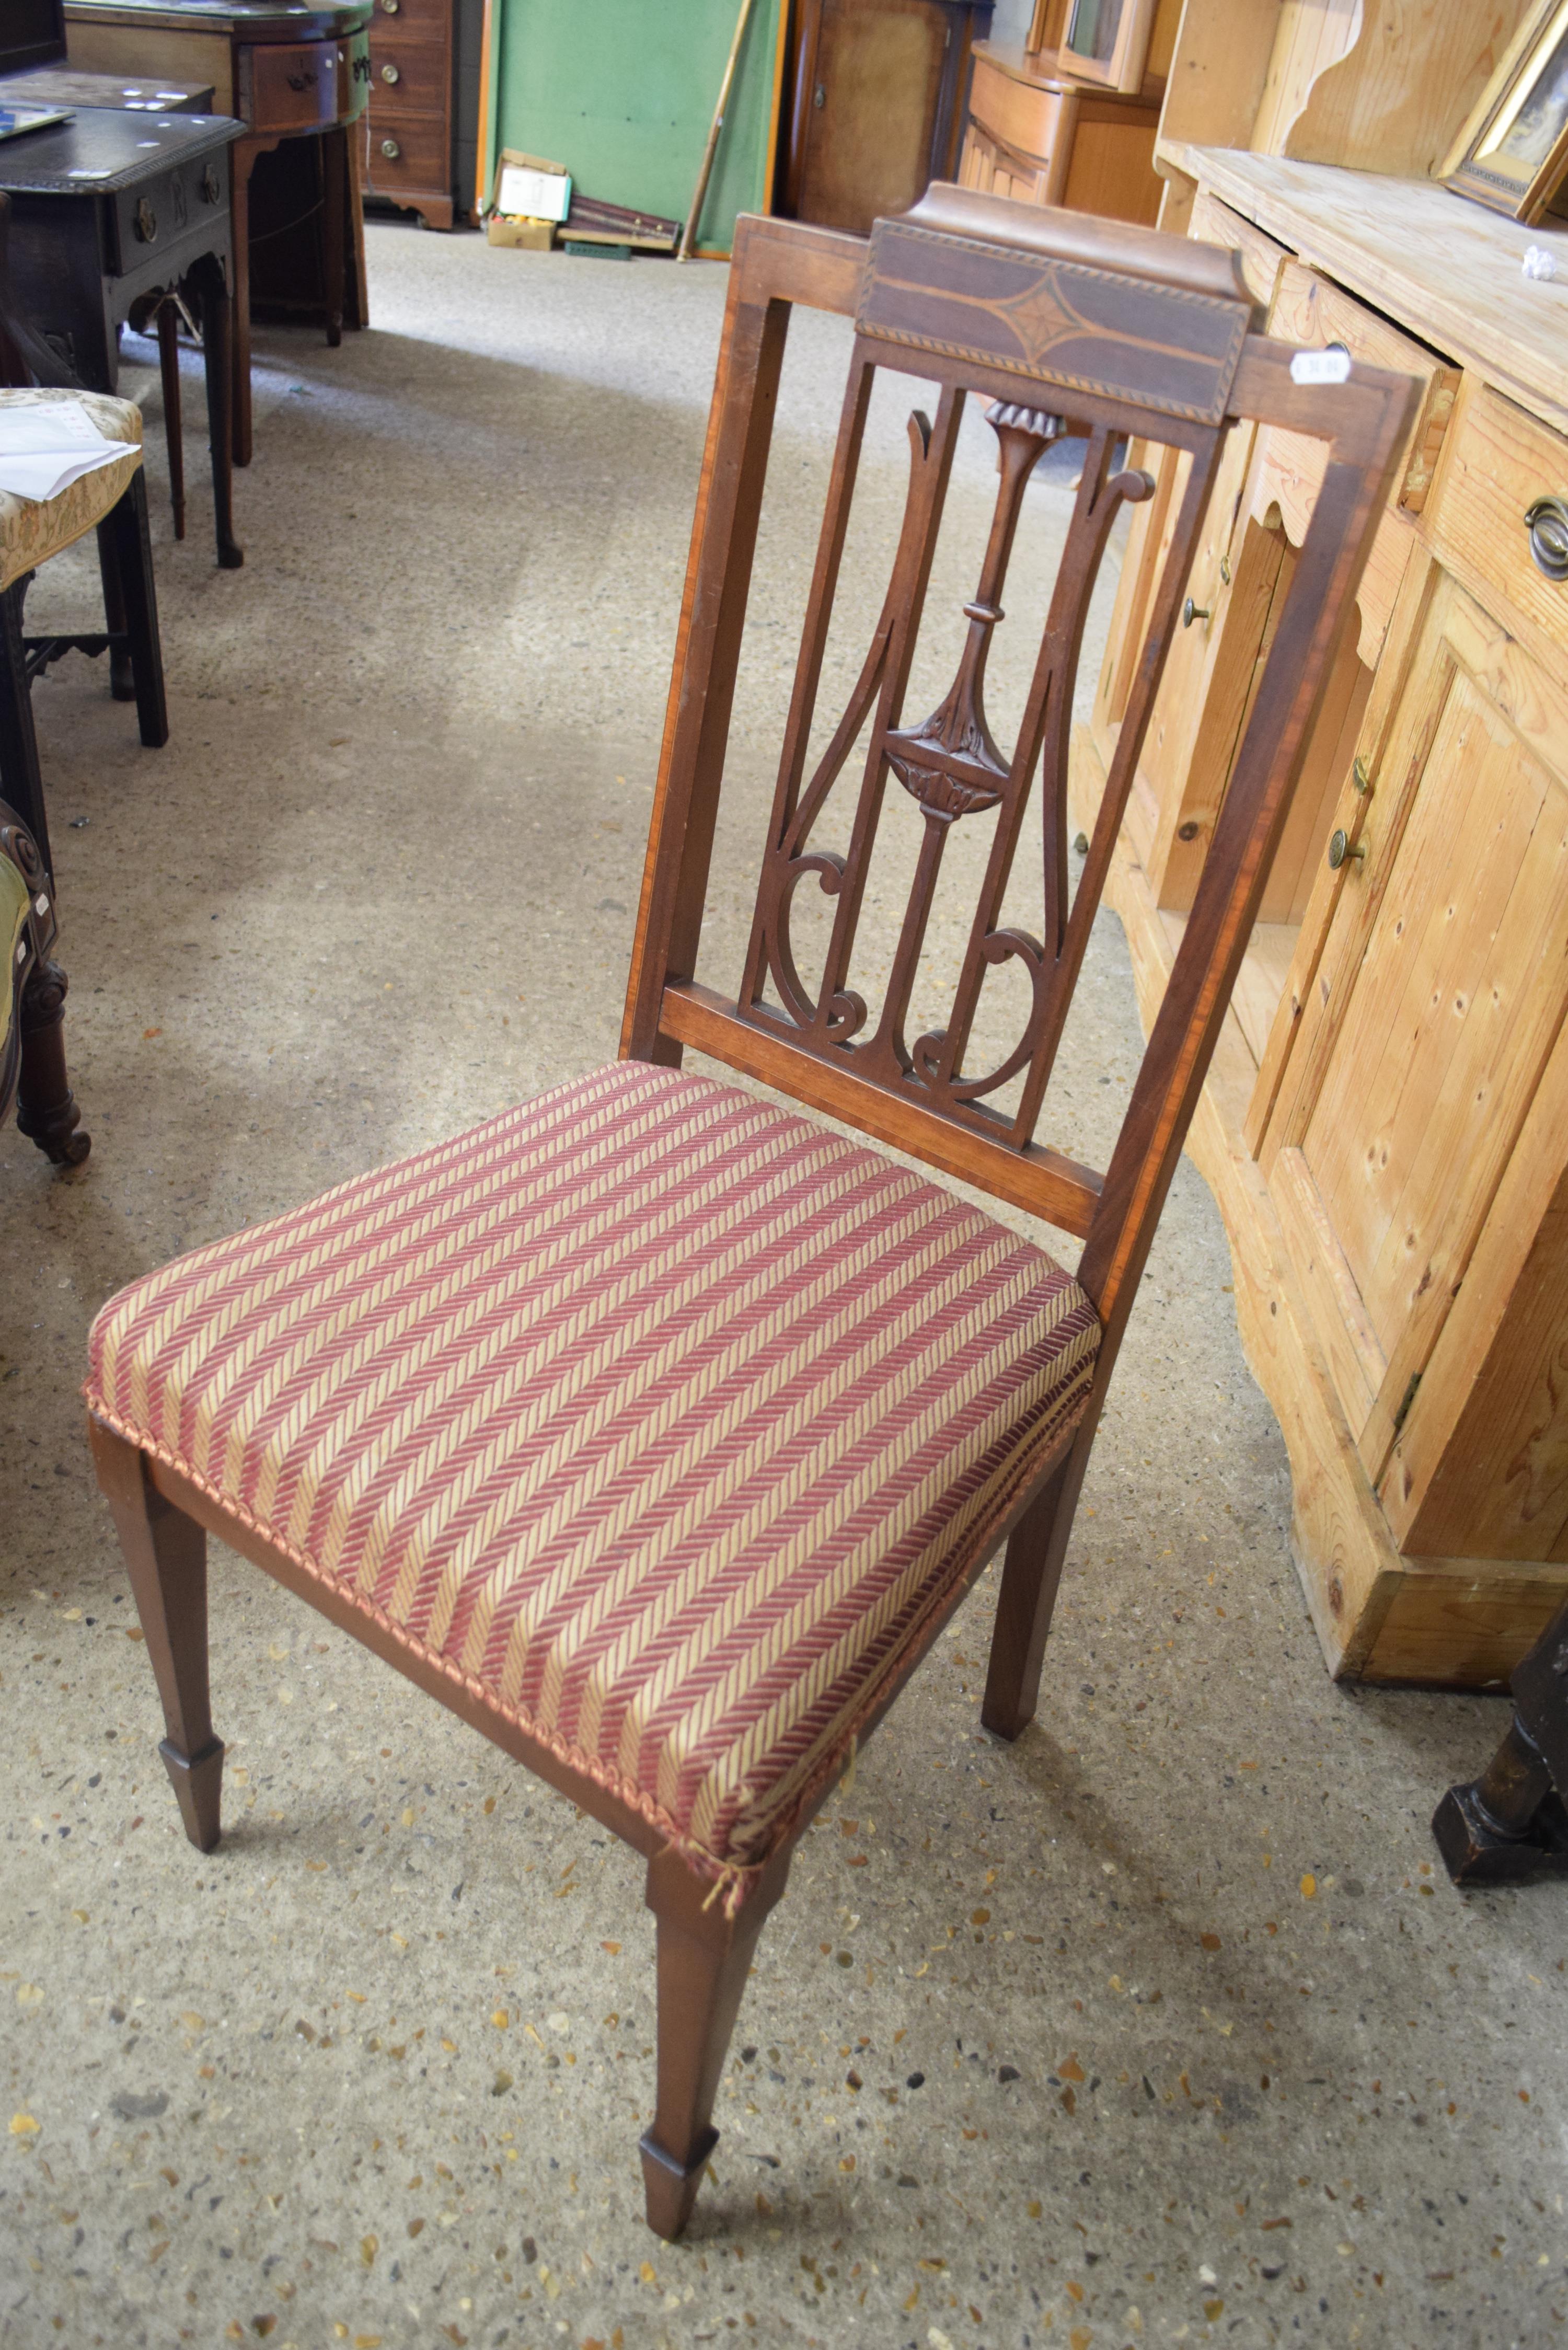 SET OF FIVE EDWARDIAN MAHOGANY DINING CHAIRS WITH STRIPED UPHOLSTERED SEATS - Image 2 of 2